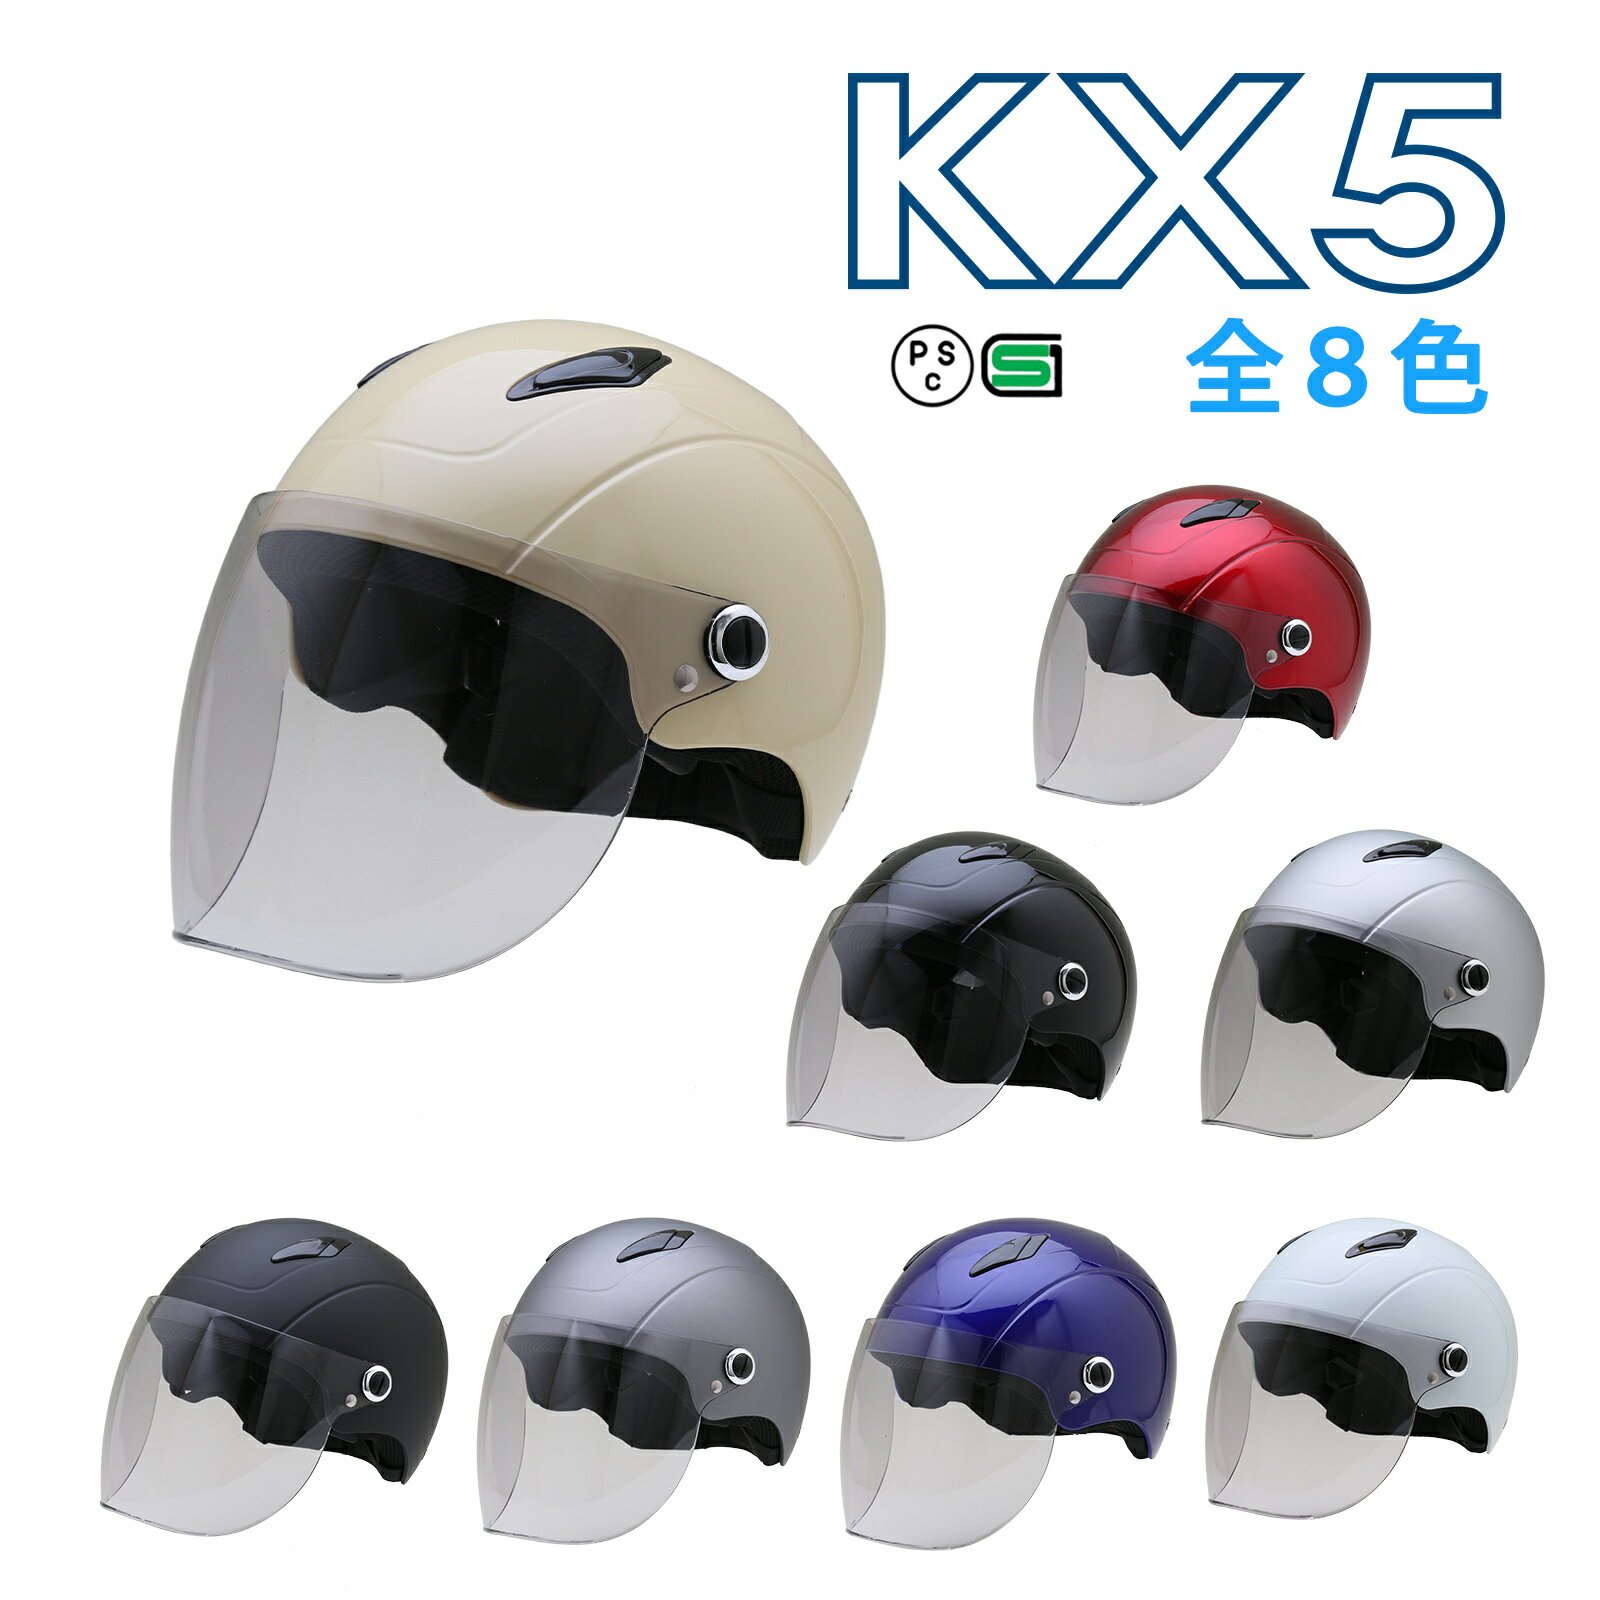 KX5 【送料無料】全8色★シールド付 ハーフヘルメット (SG品/PSC付) NEORIDERS バイクヘルメット バイク ヘルメット …